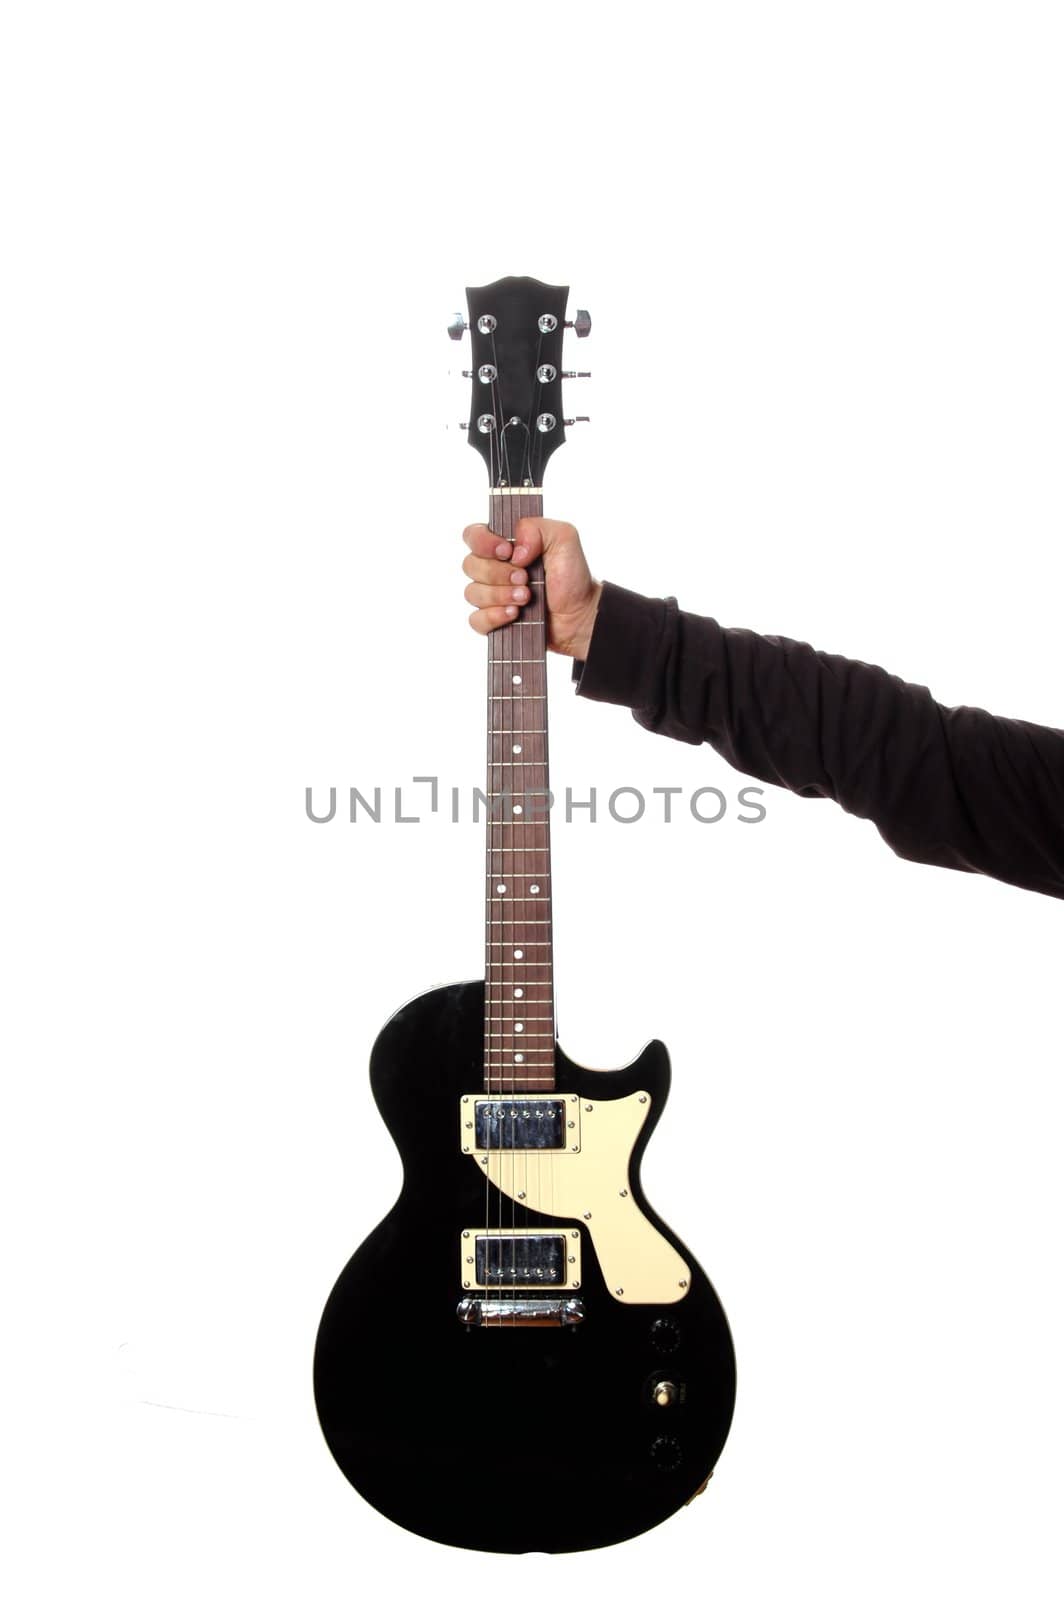 hand with guitar by raalves